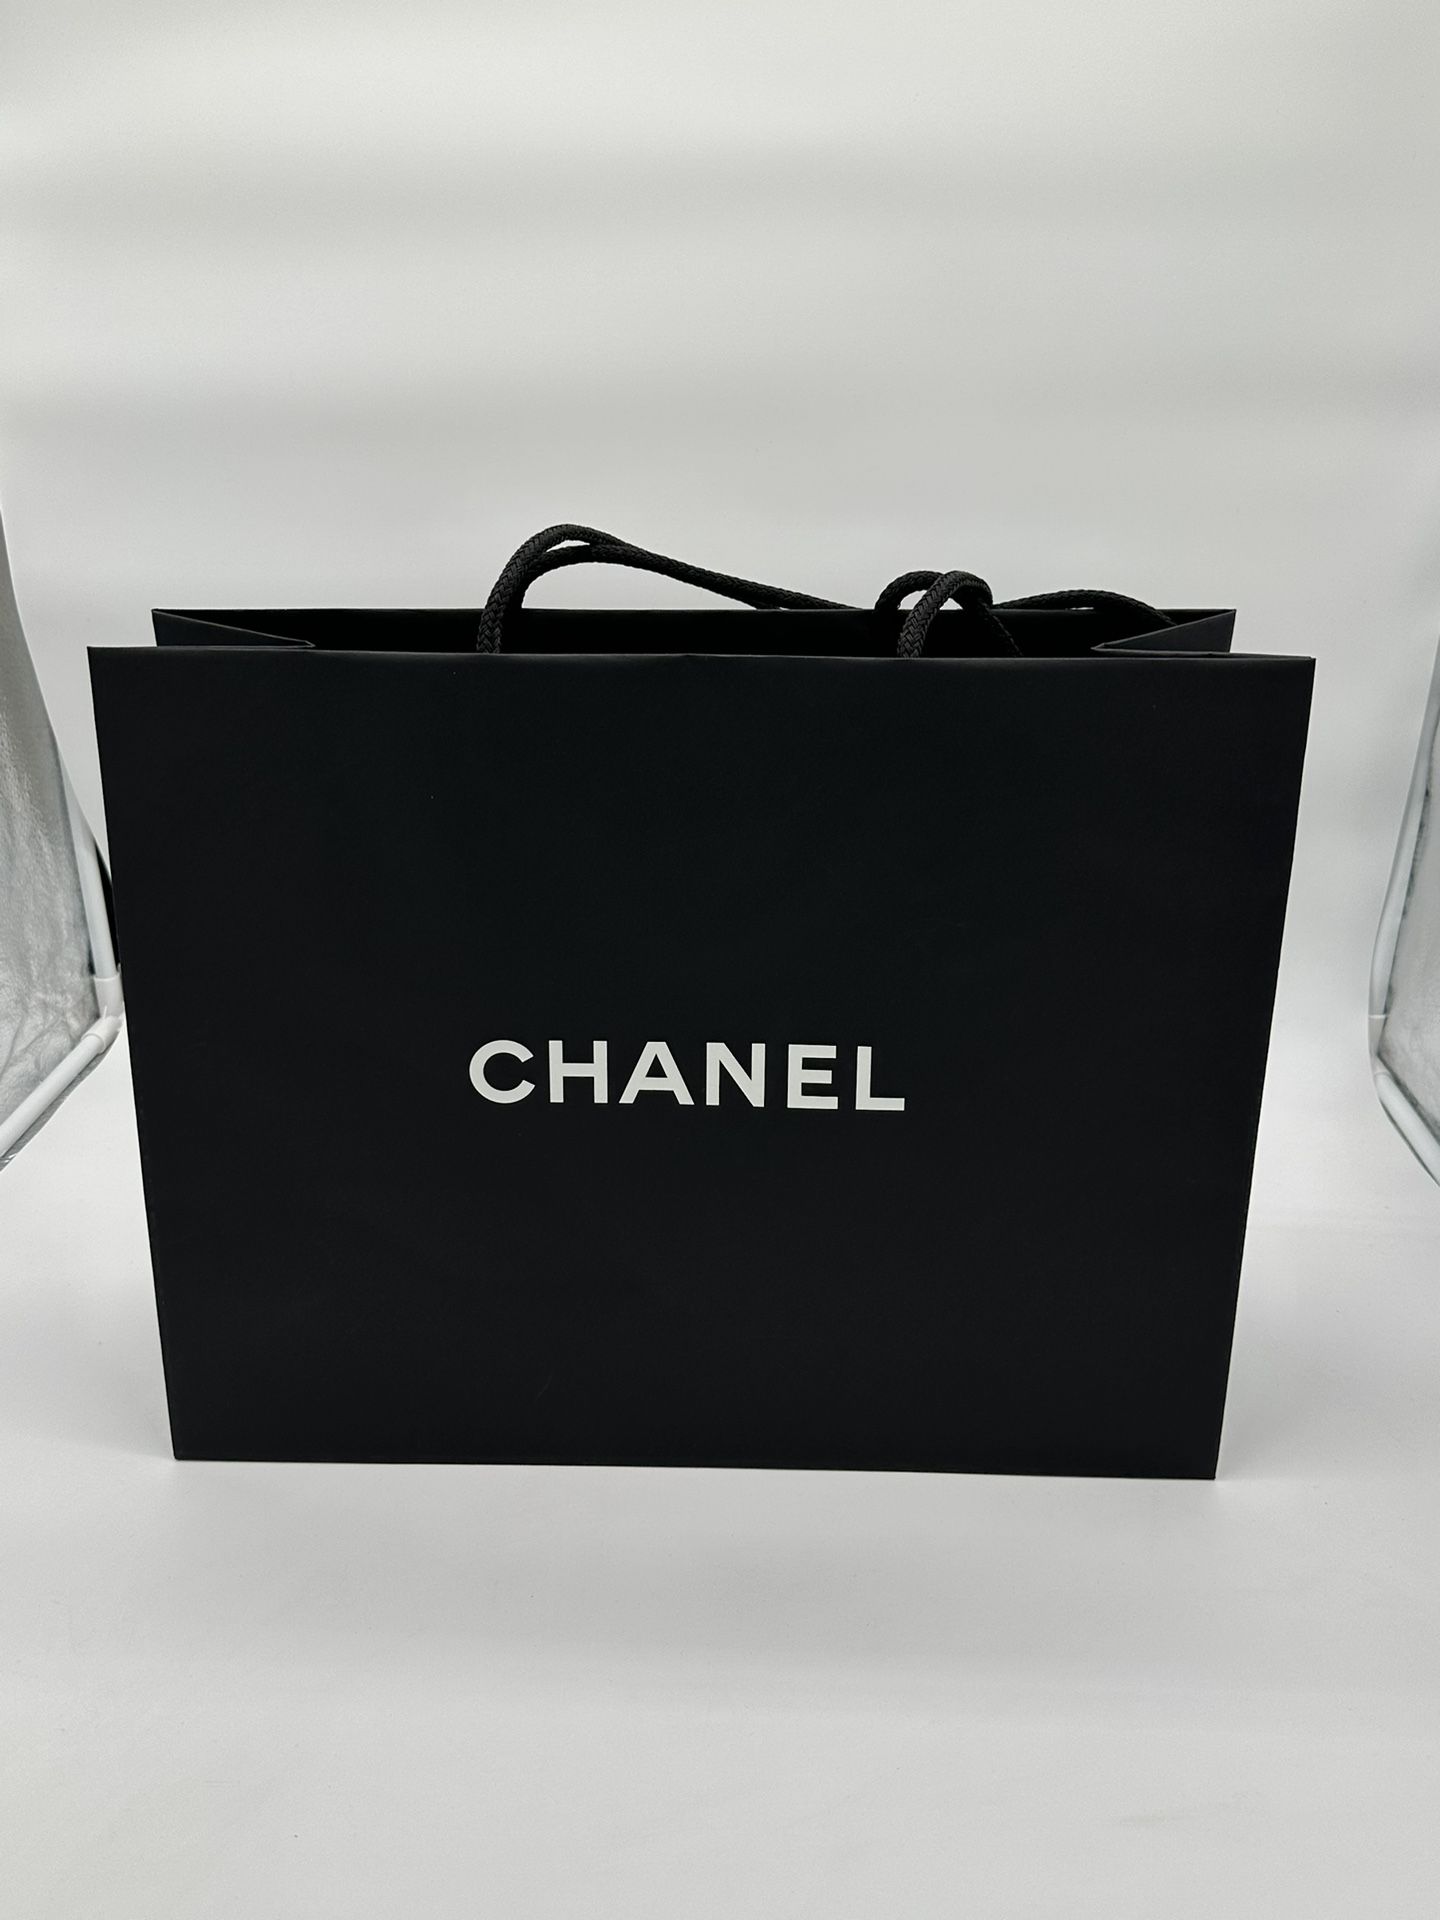 Chanel Black Paper Shopping Gift Bag 17" x 13" x 6.25"  Authentic